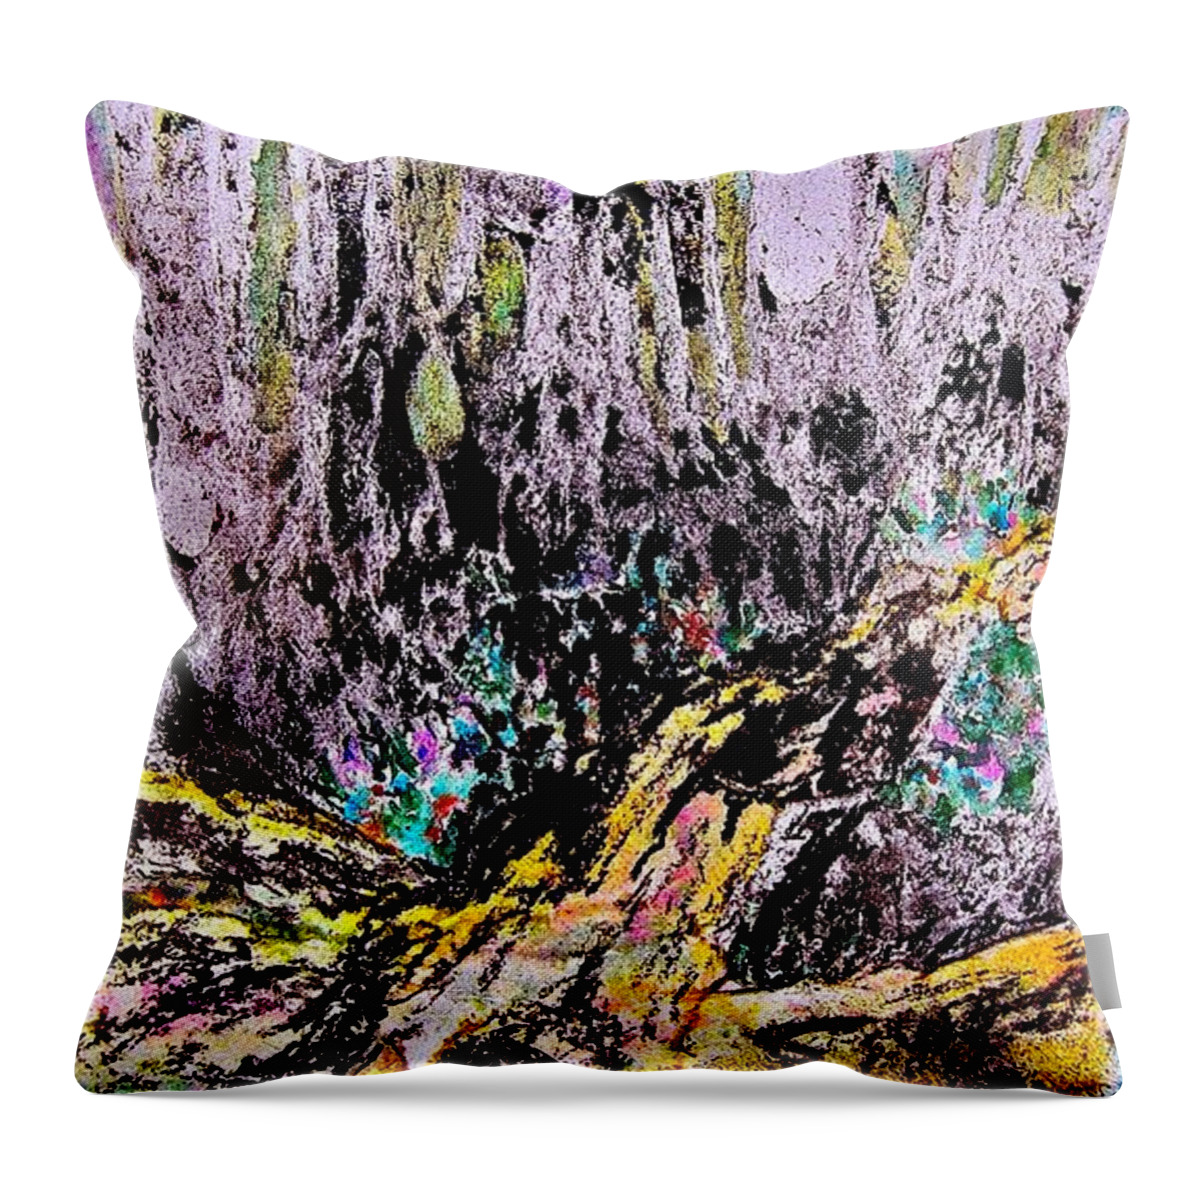 Watercolor Throw Pillow featuring the painting Wooded Growth by Carolyn Rosenberger